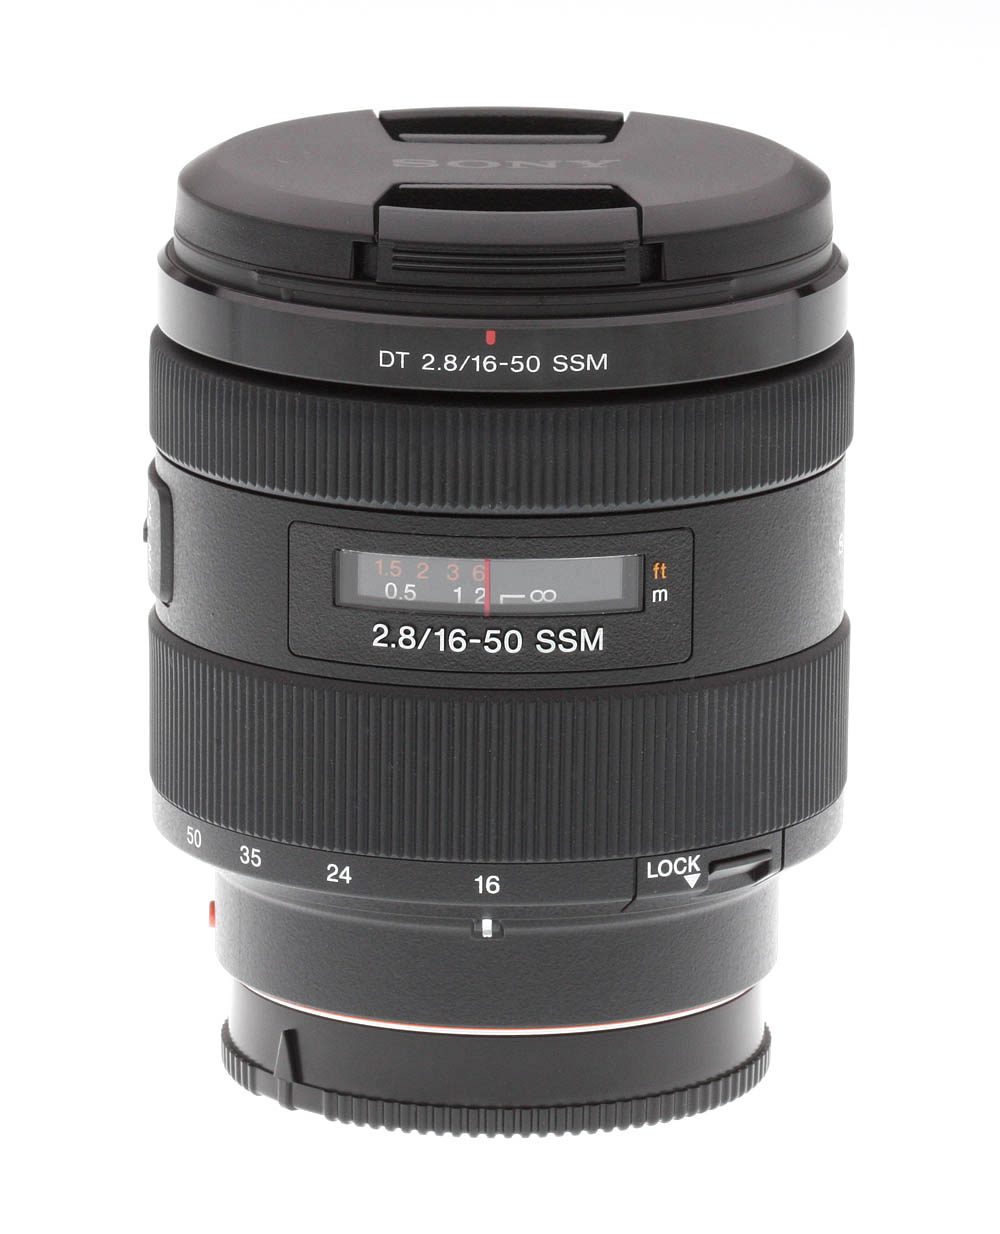 Sony 16-50mm f/2.8 DT SSM SAL1650 Review